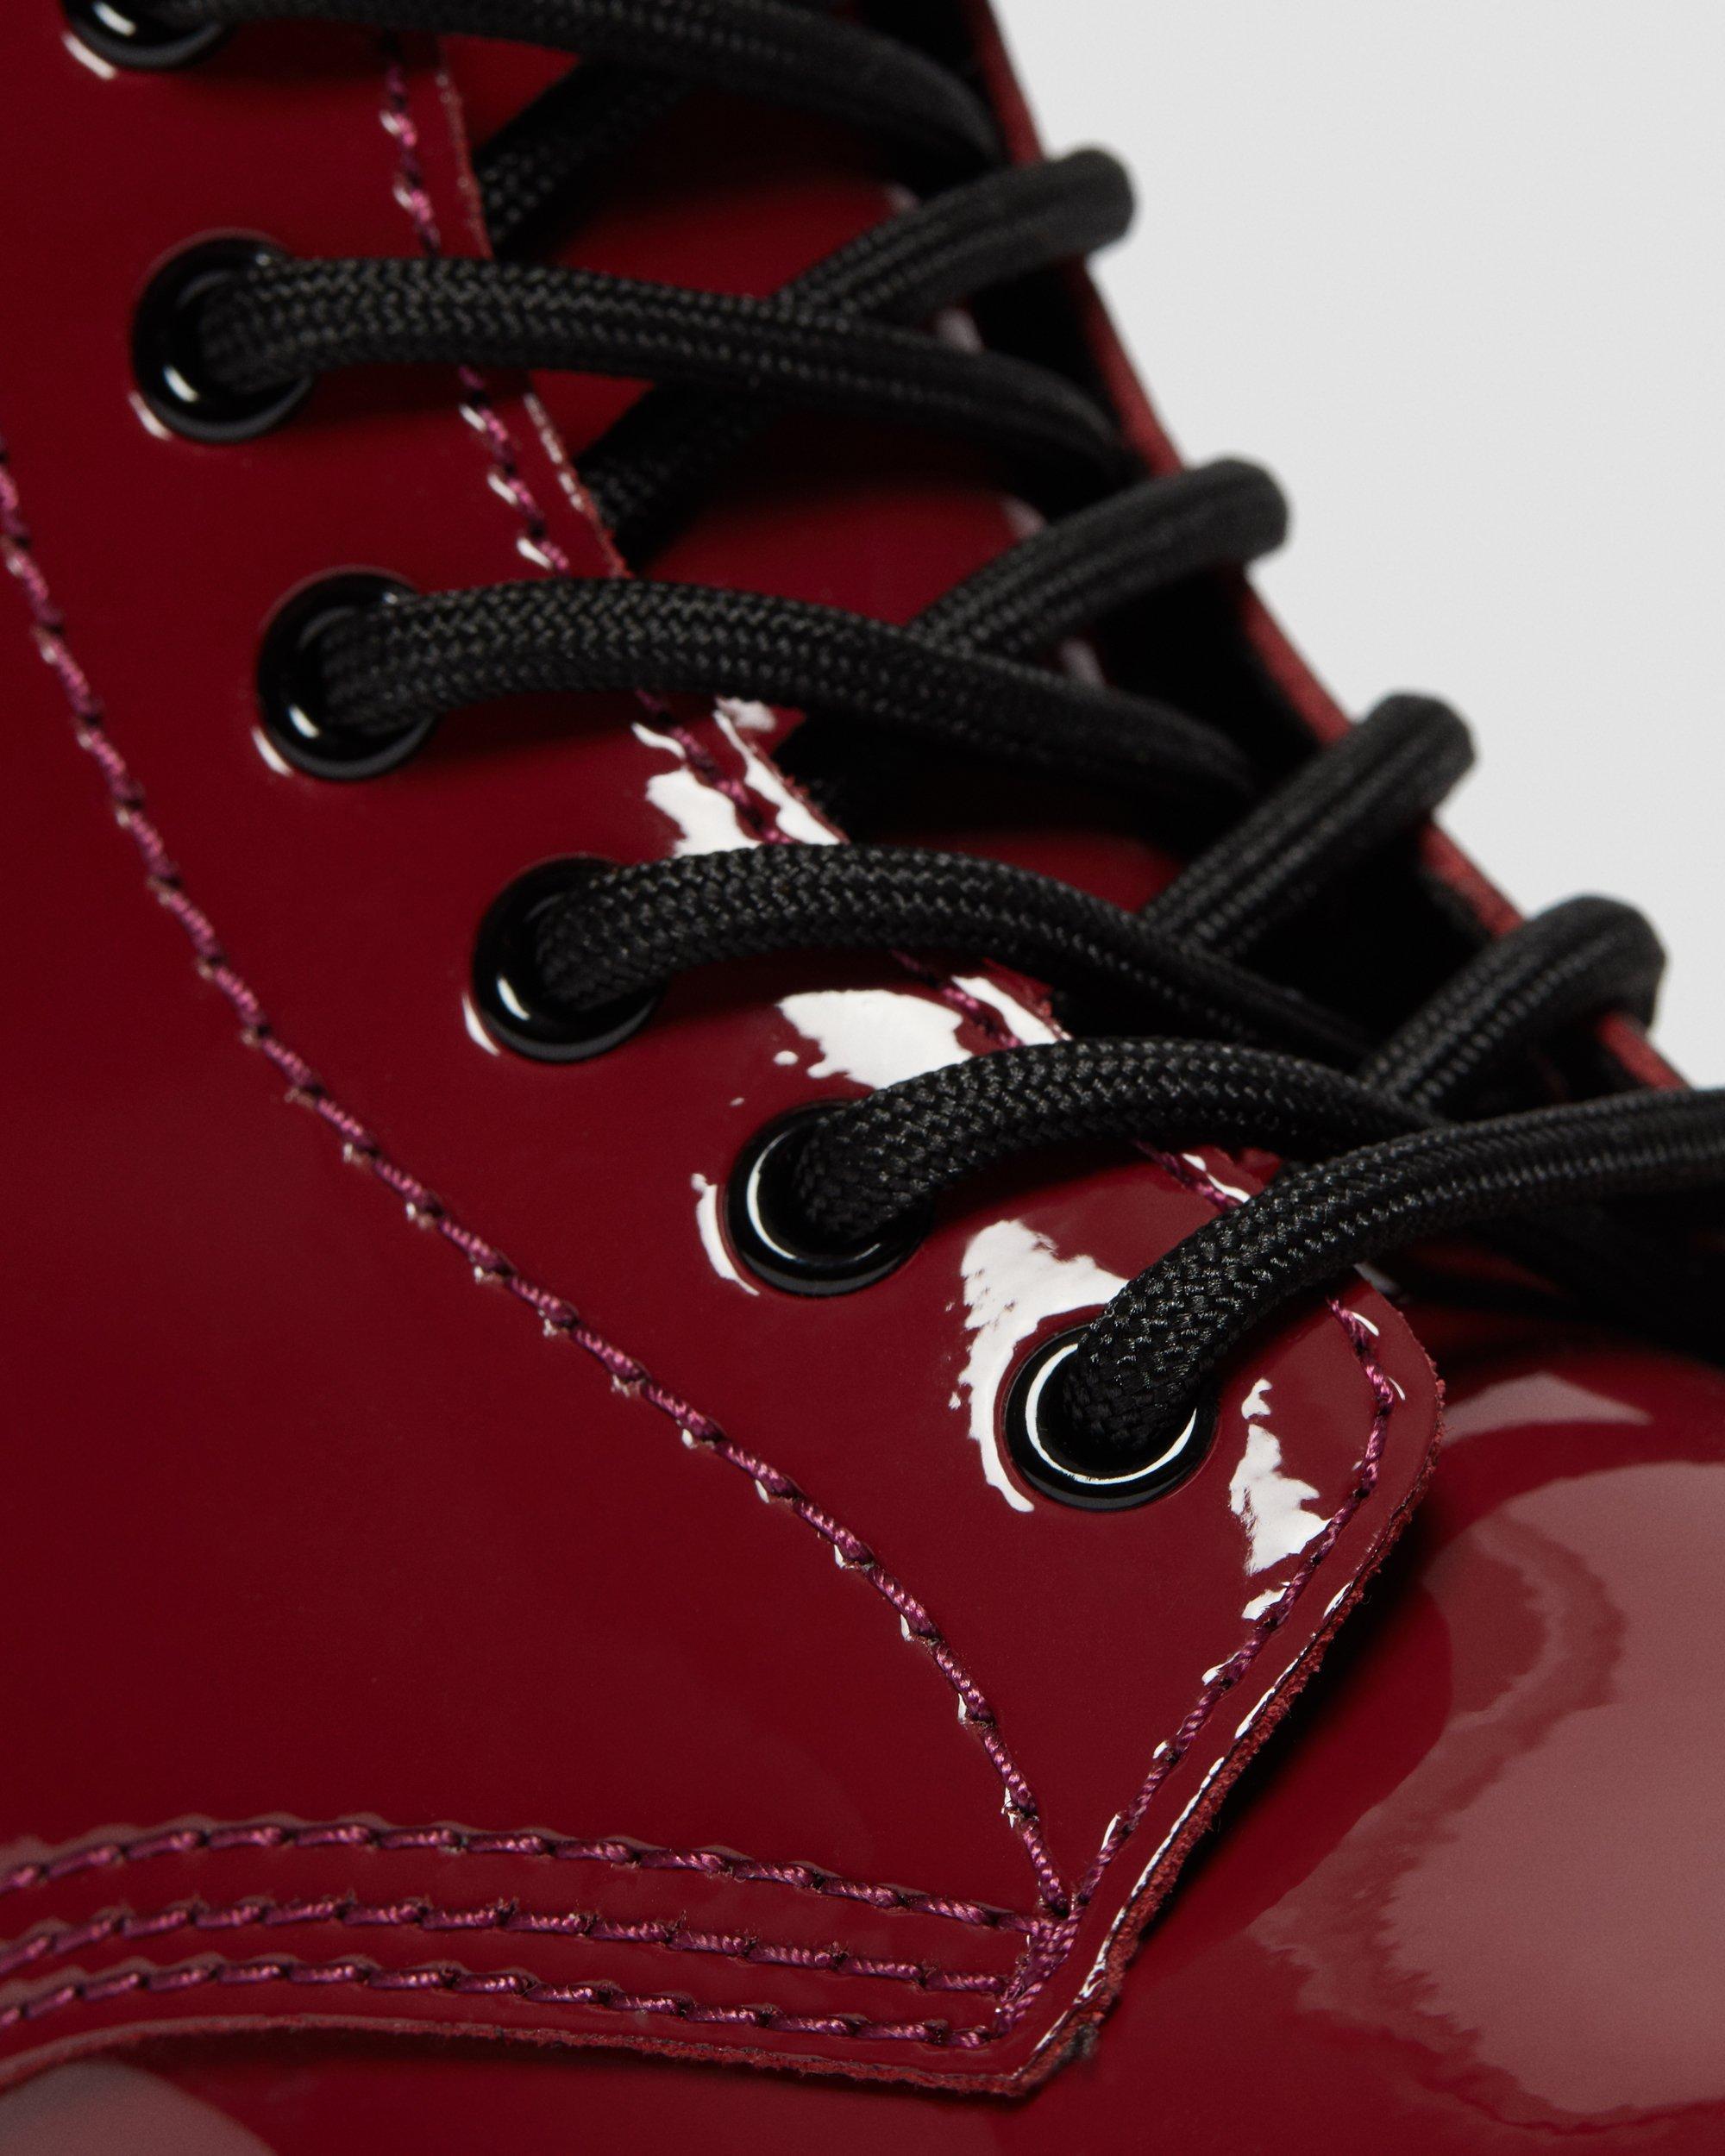 Junior 1460 Patent Leather Lace Up Boots in Dark Red